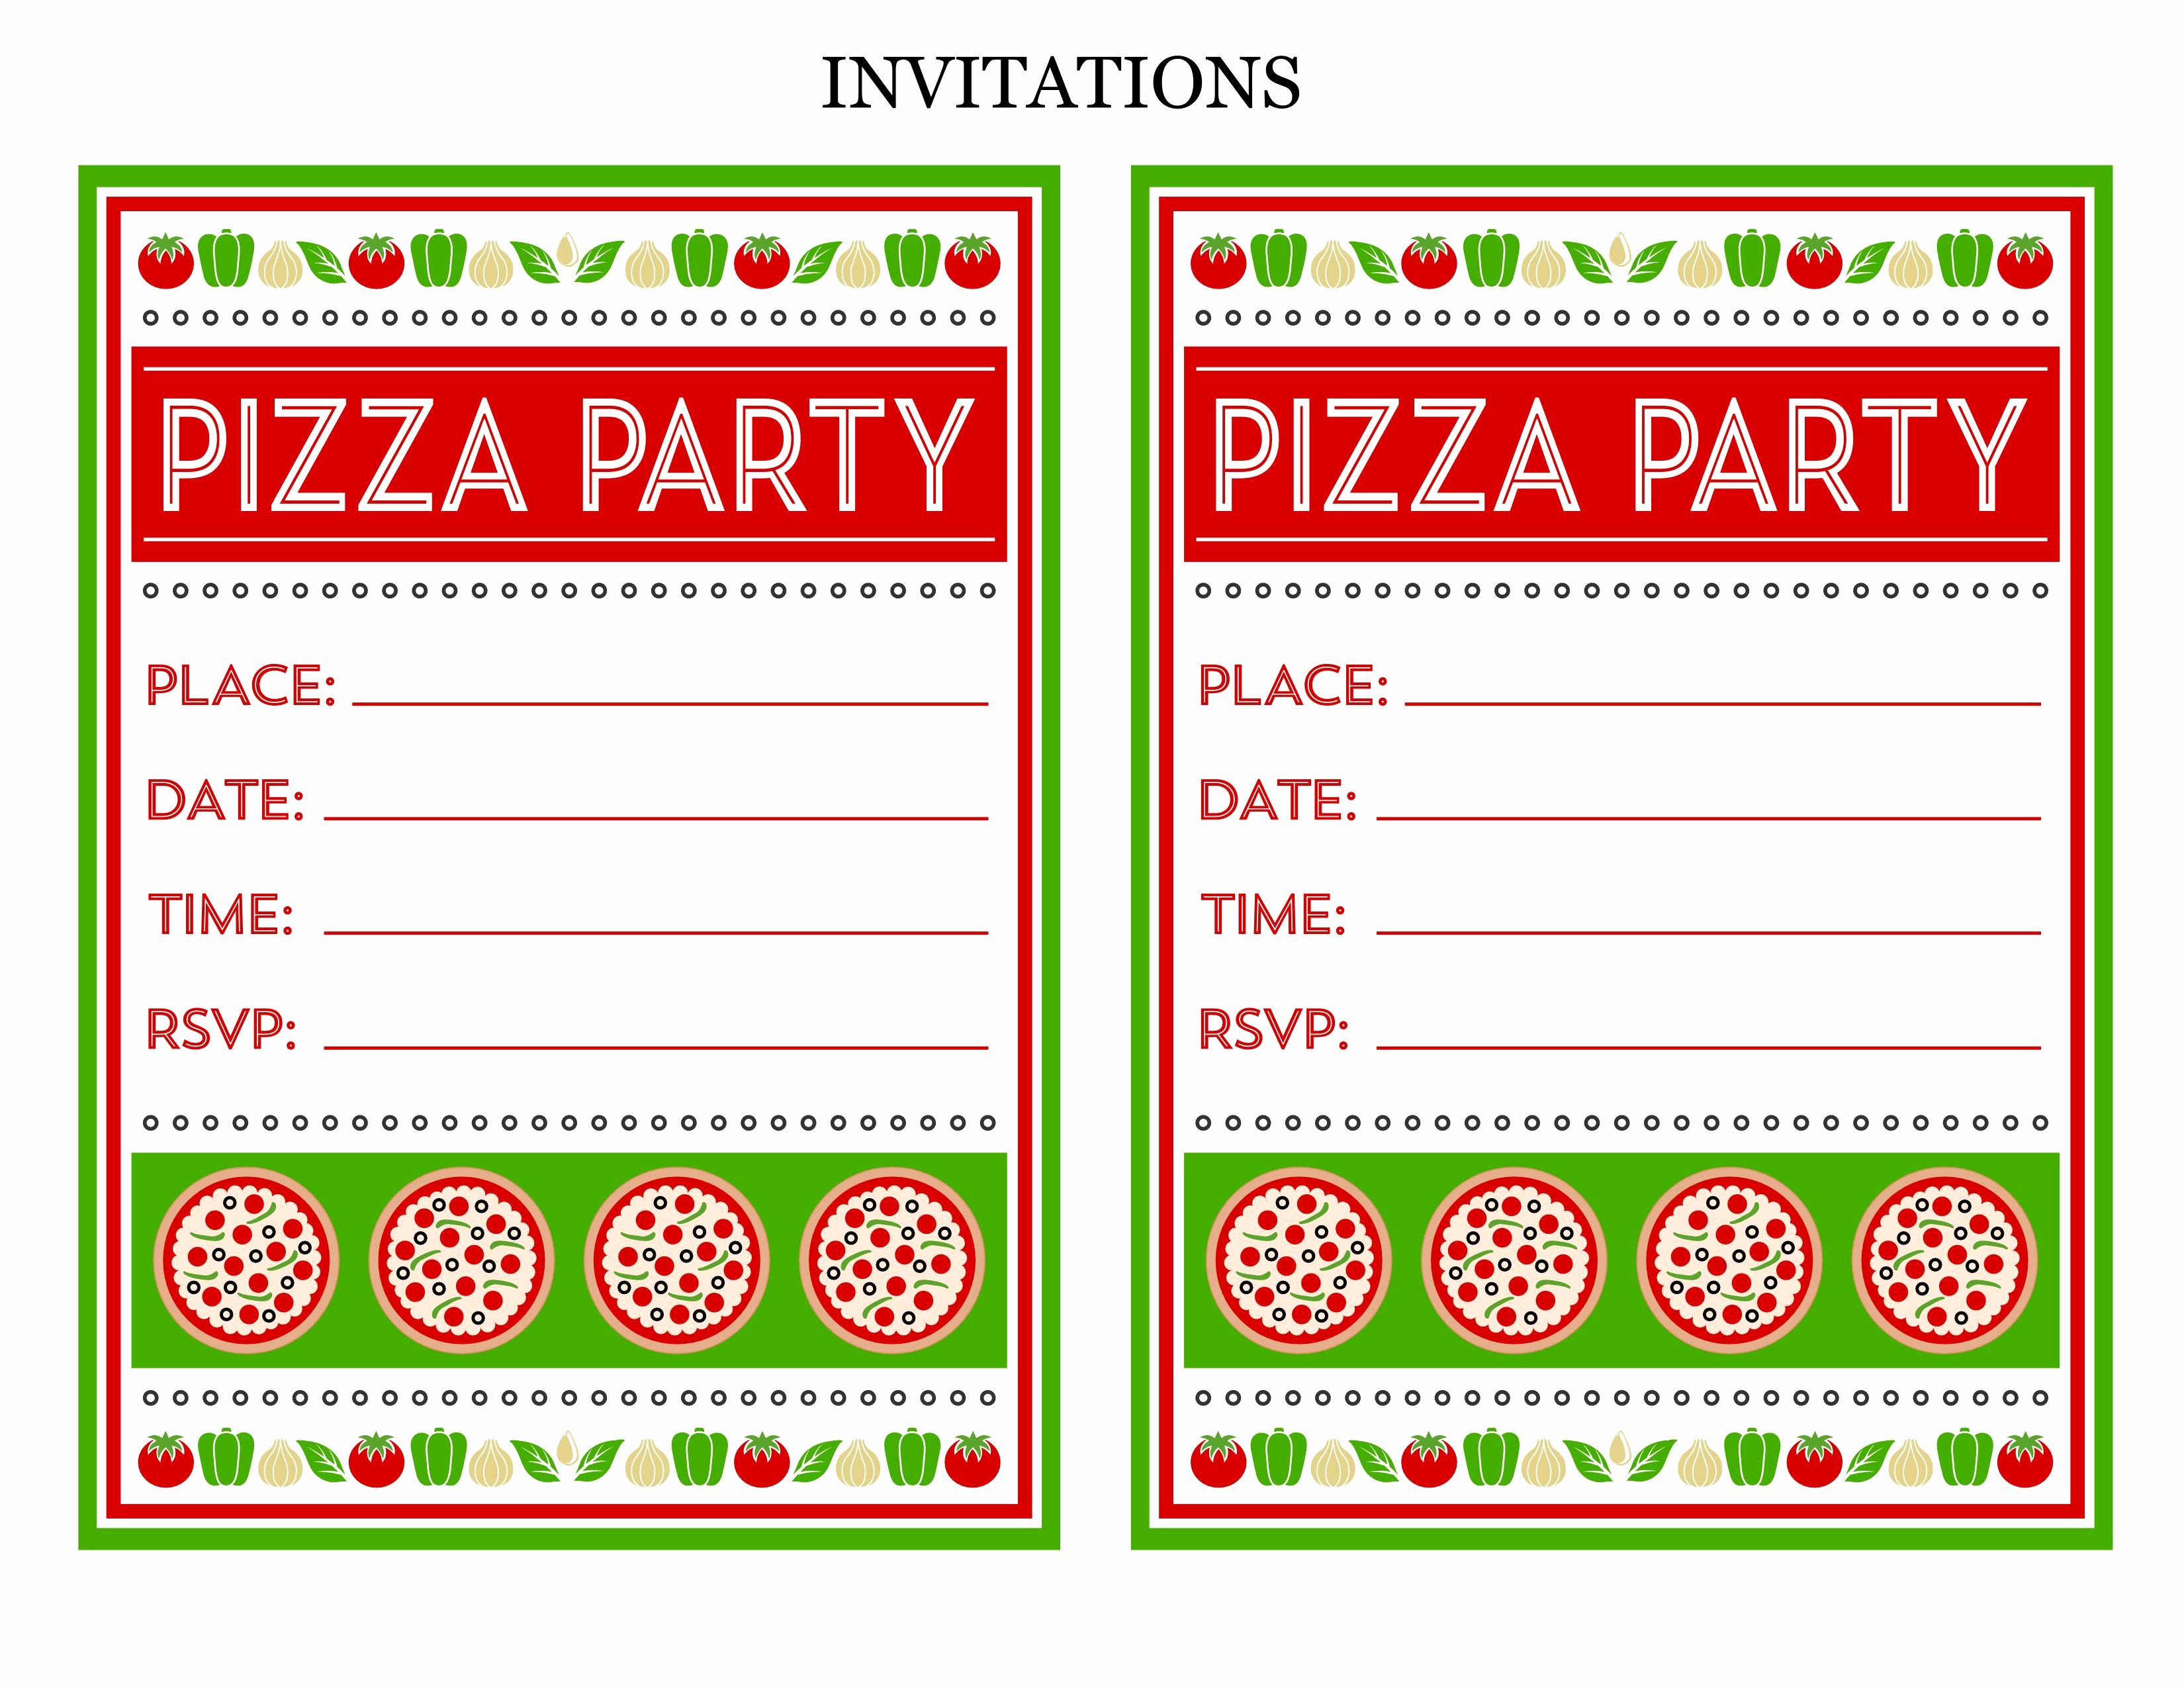 Pizza Party Invites Template Best Of Free Pizza Party Invitation Template Recent Pizza Party